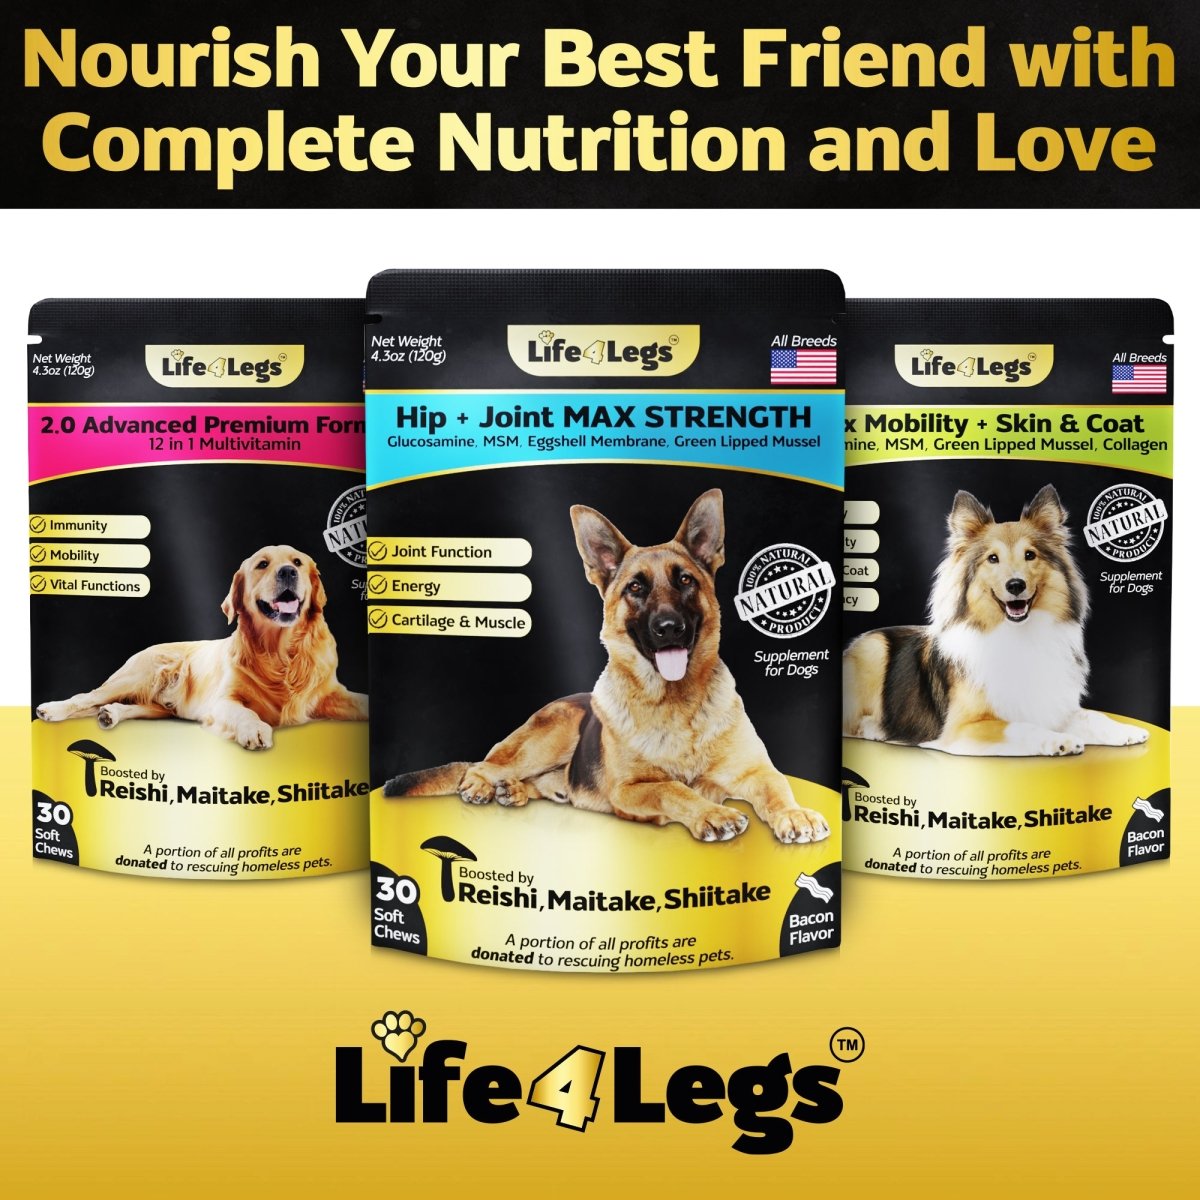 Life4Legs - 30 Soft chews Hip and Joint Supplement for Dogs - Dog Joint Pain Relief Treats - Glucosamine, Chondroitin, Turmeric, MSM - Hemp oil Mobility Supplement with Green Lipped Mussels - Life4legs